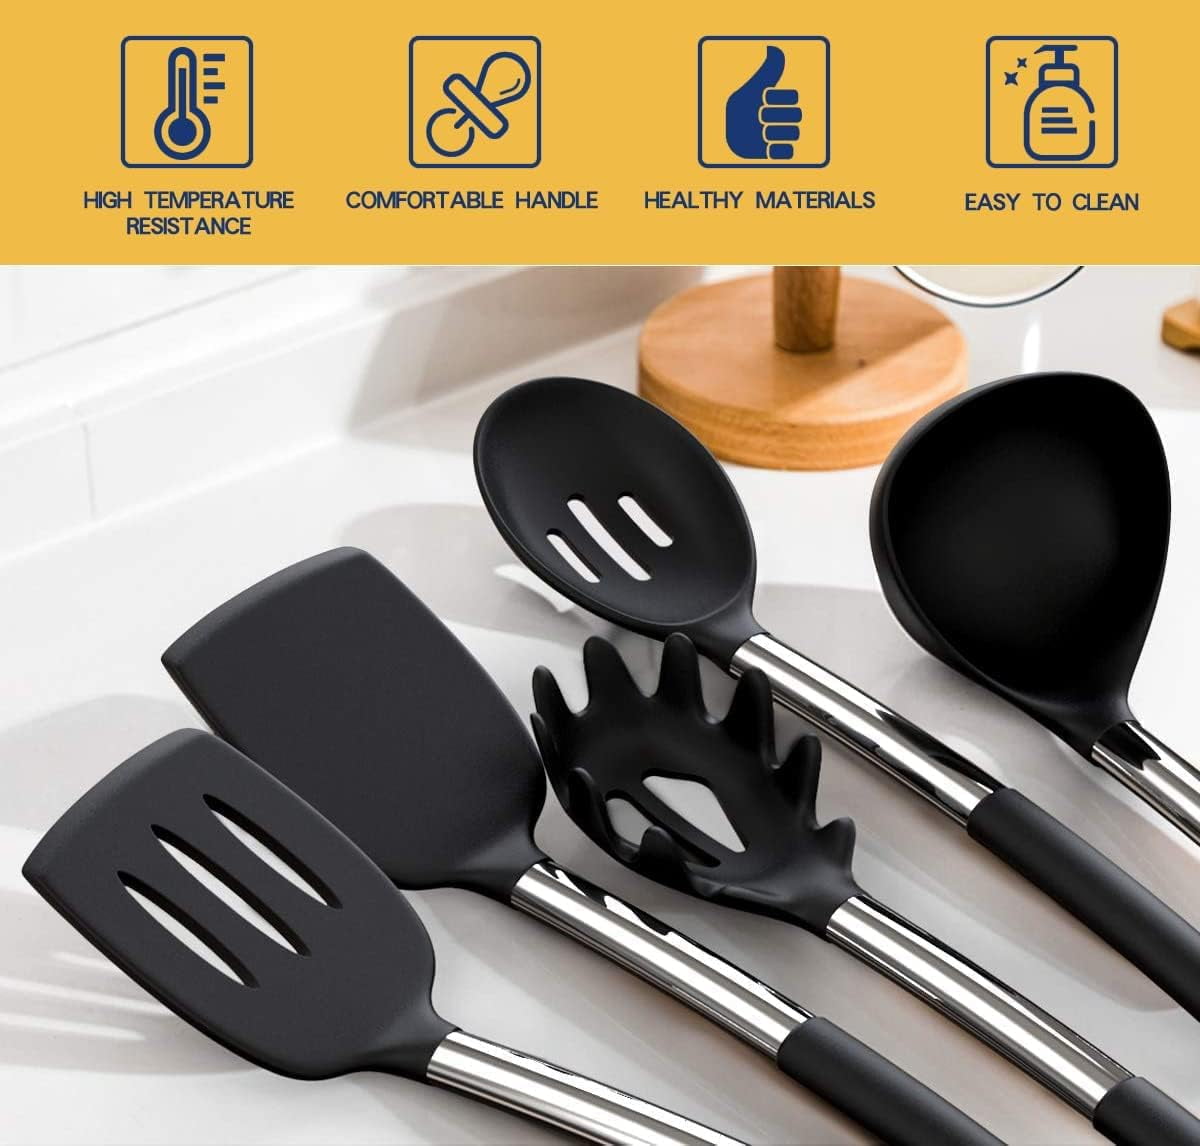  Silicone Cooking Utensil Set, Fungun Non-stick Kitchen Utensil  24 Pcs Cooking Utensils Set, Heat Resistant Cookware, Silicone Kitchen Tools  Gift with Stainless Steel Handle (Khaki-24pcs) … : Home & Kitchen